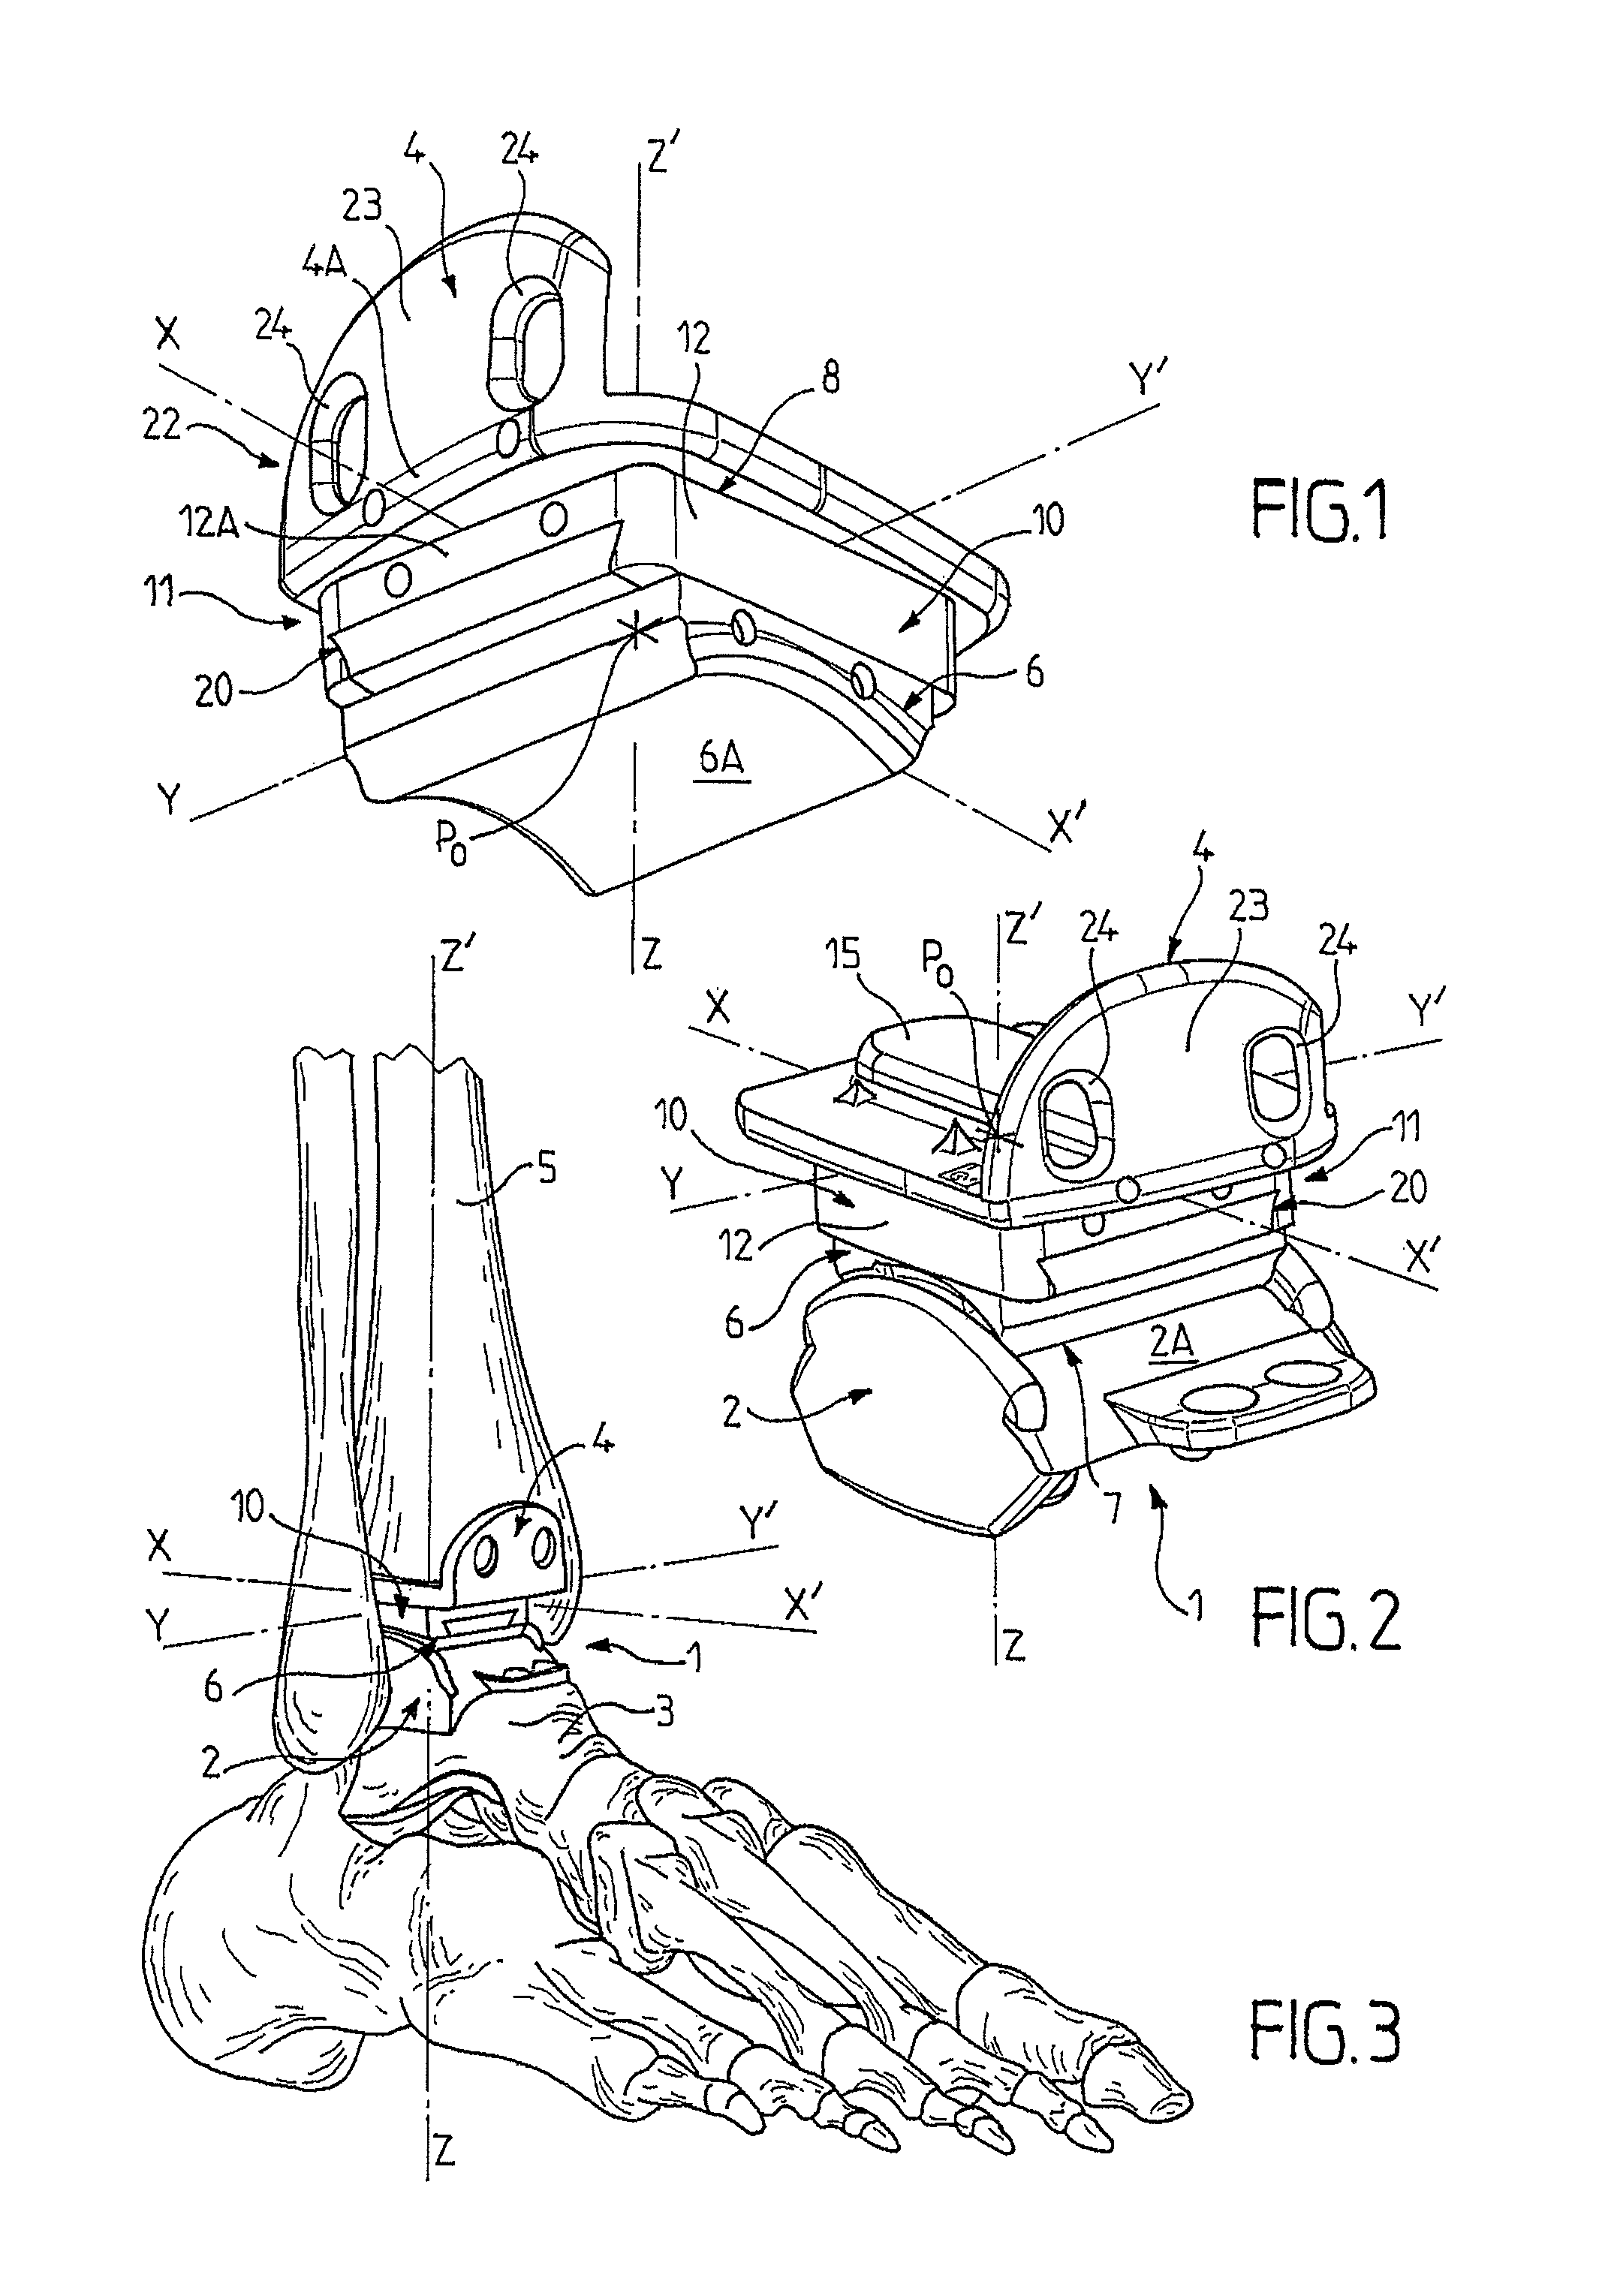 Ankle prosthesis with neutral position adjustment